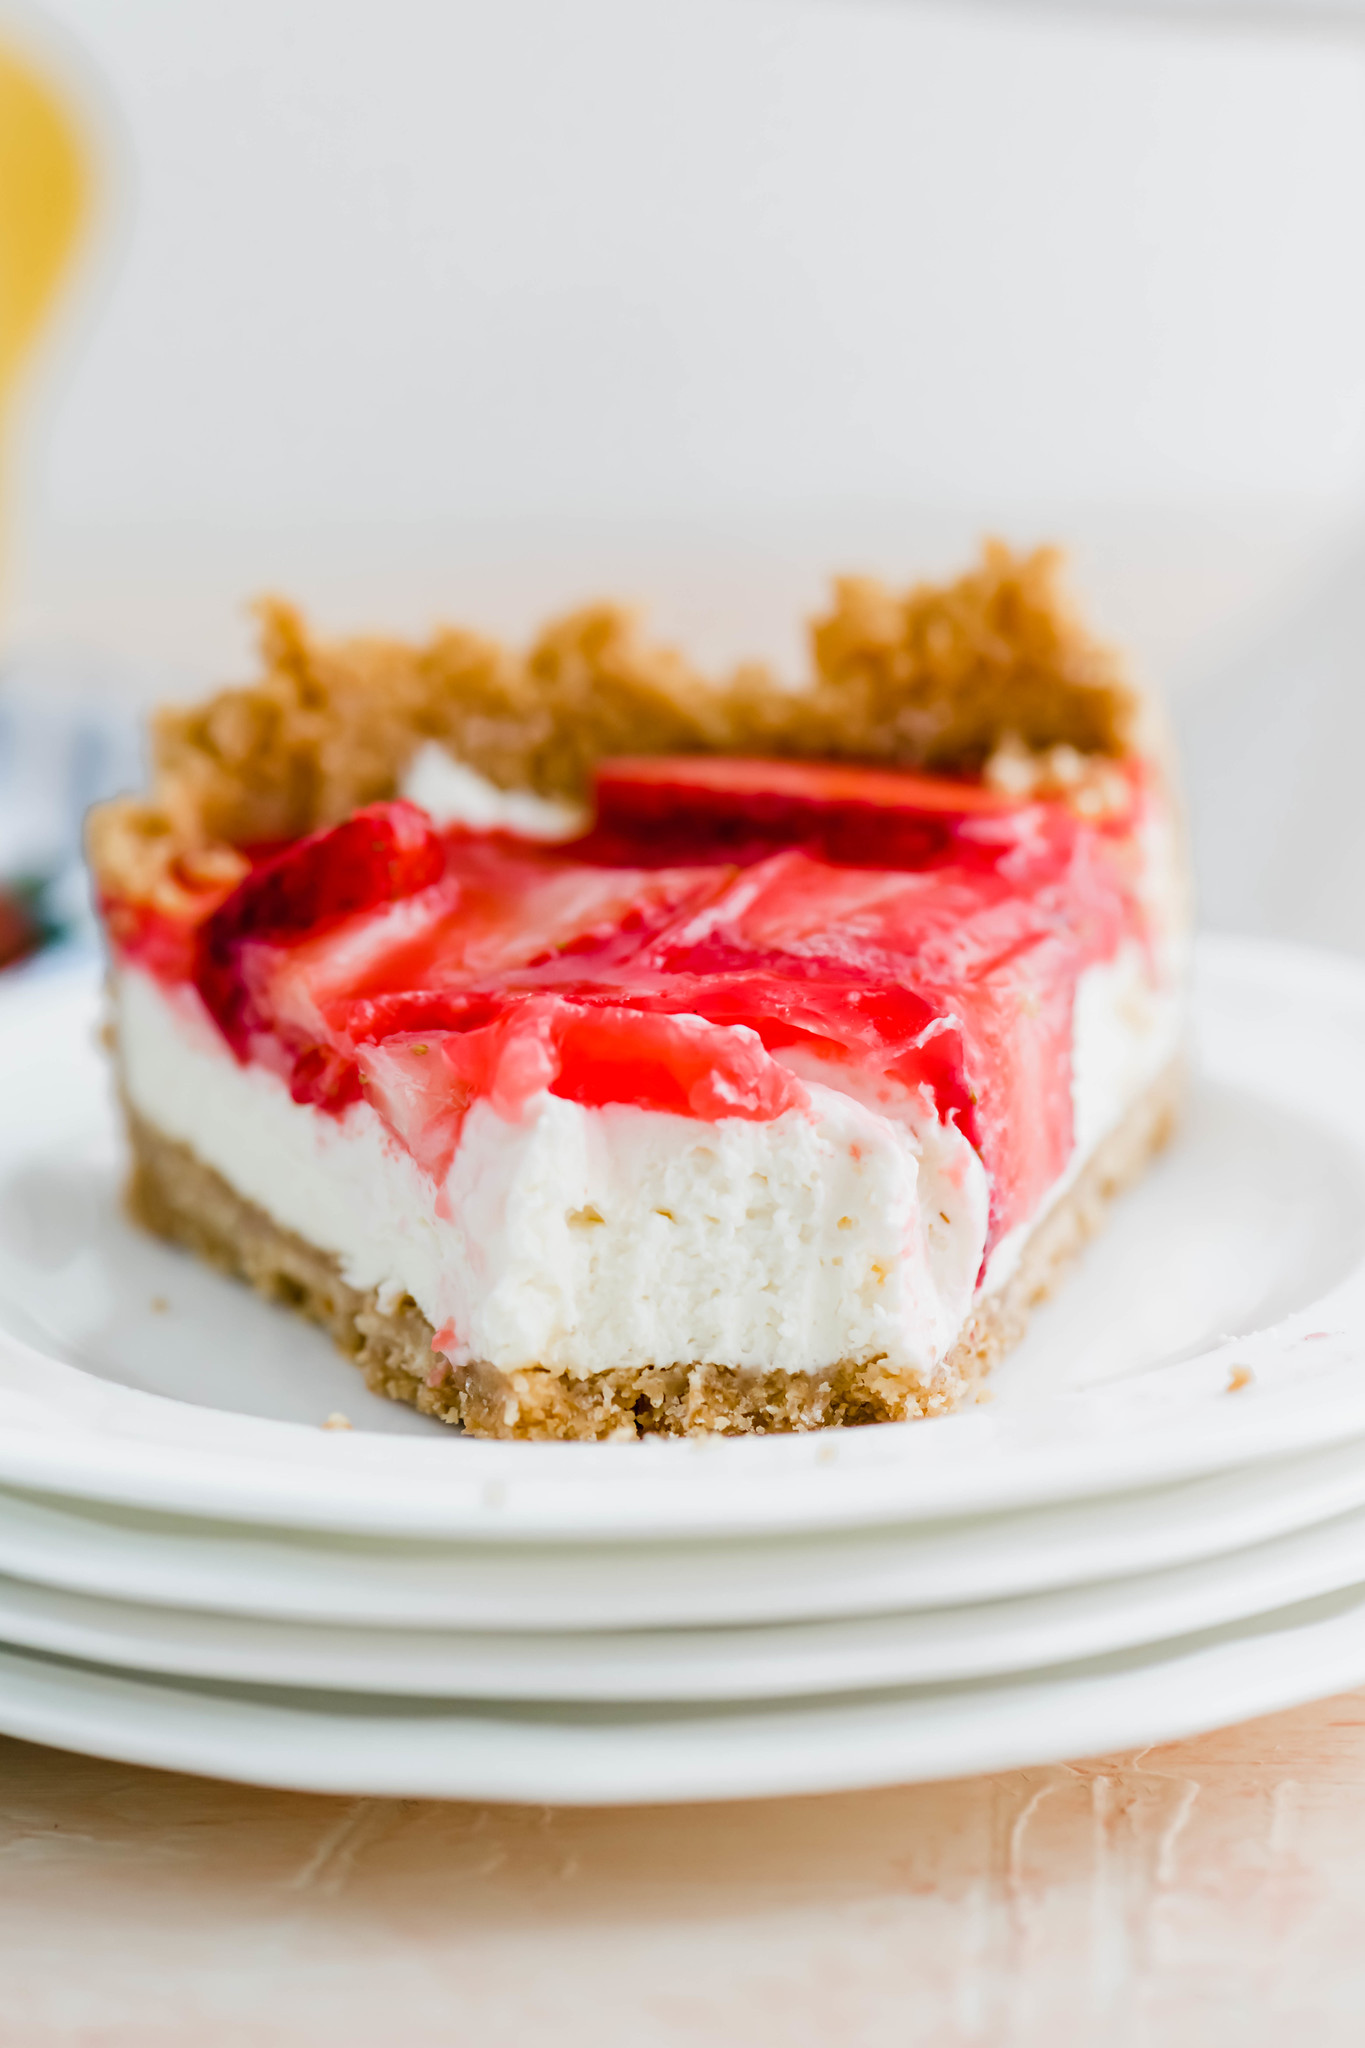 I combined two favorite summer desserts, cheesecake and strawberry pie, to make the most delicious treat, Strawberry Cream Cheese Pie. A fluffy, no-bake cheesecake filling topped with classic strawberry pie filling will have you addicted in no time.